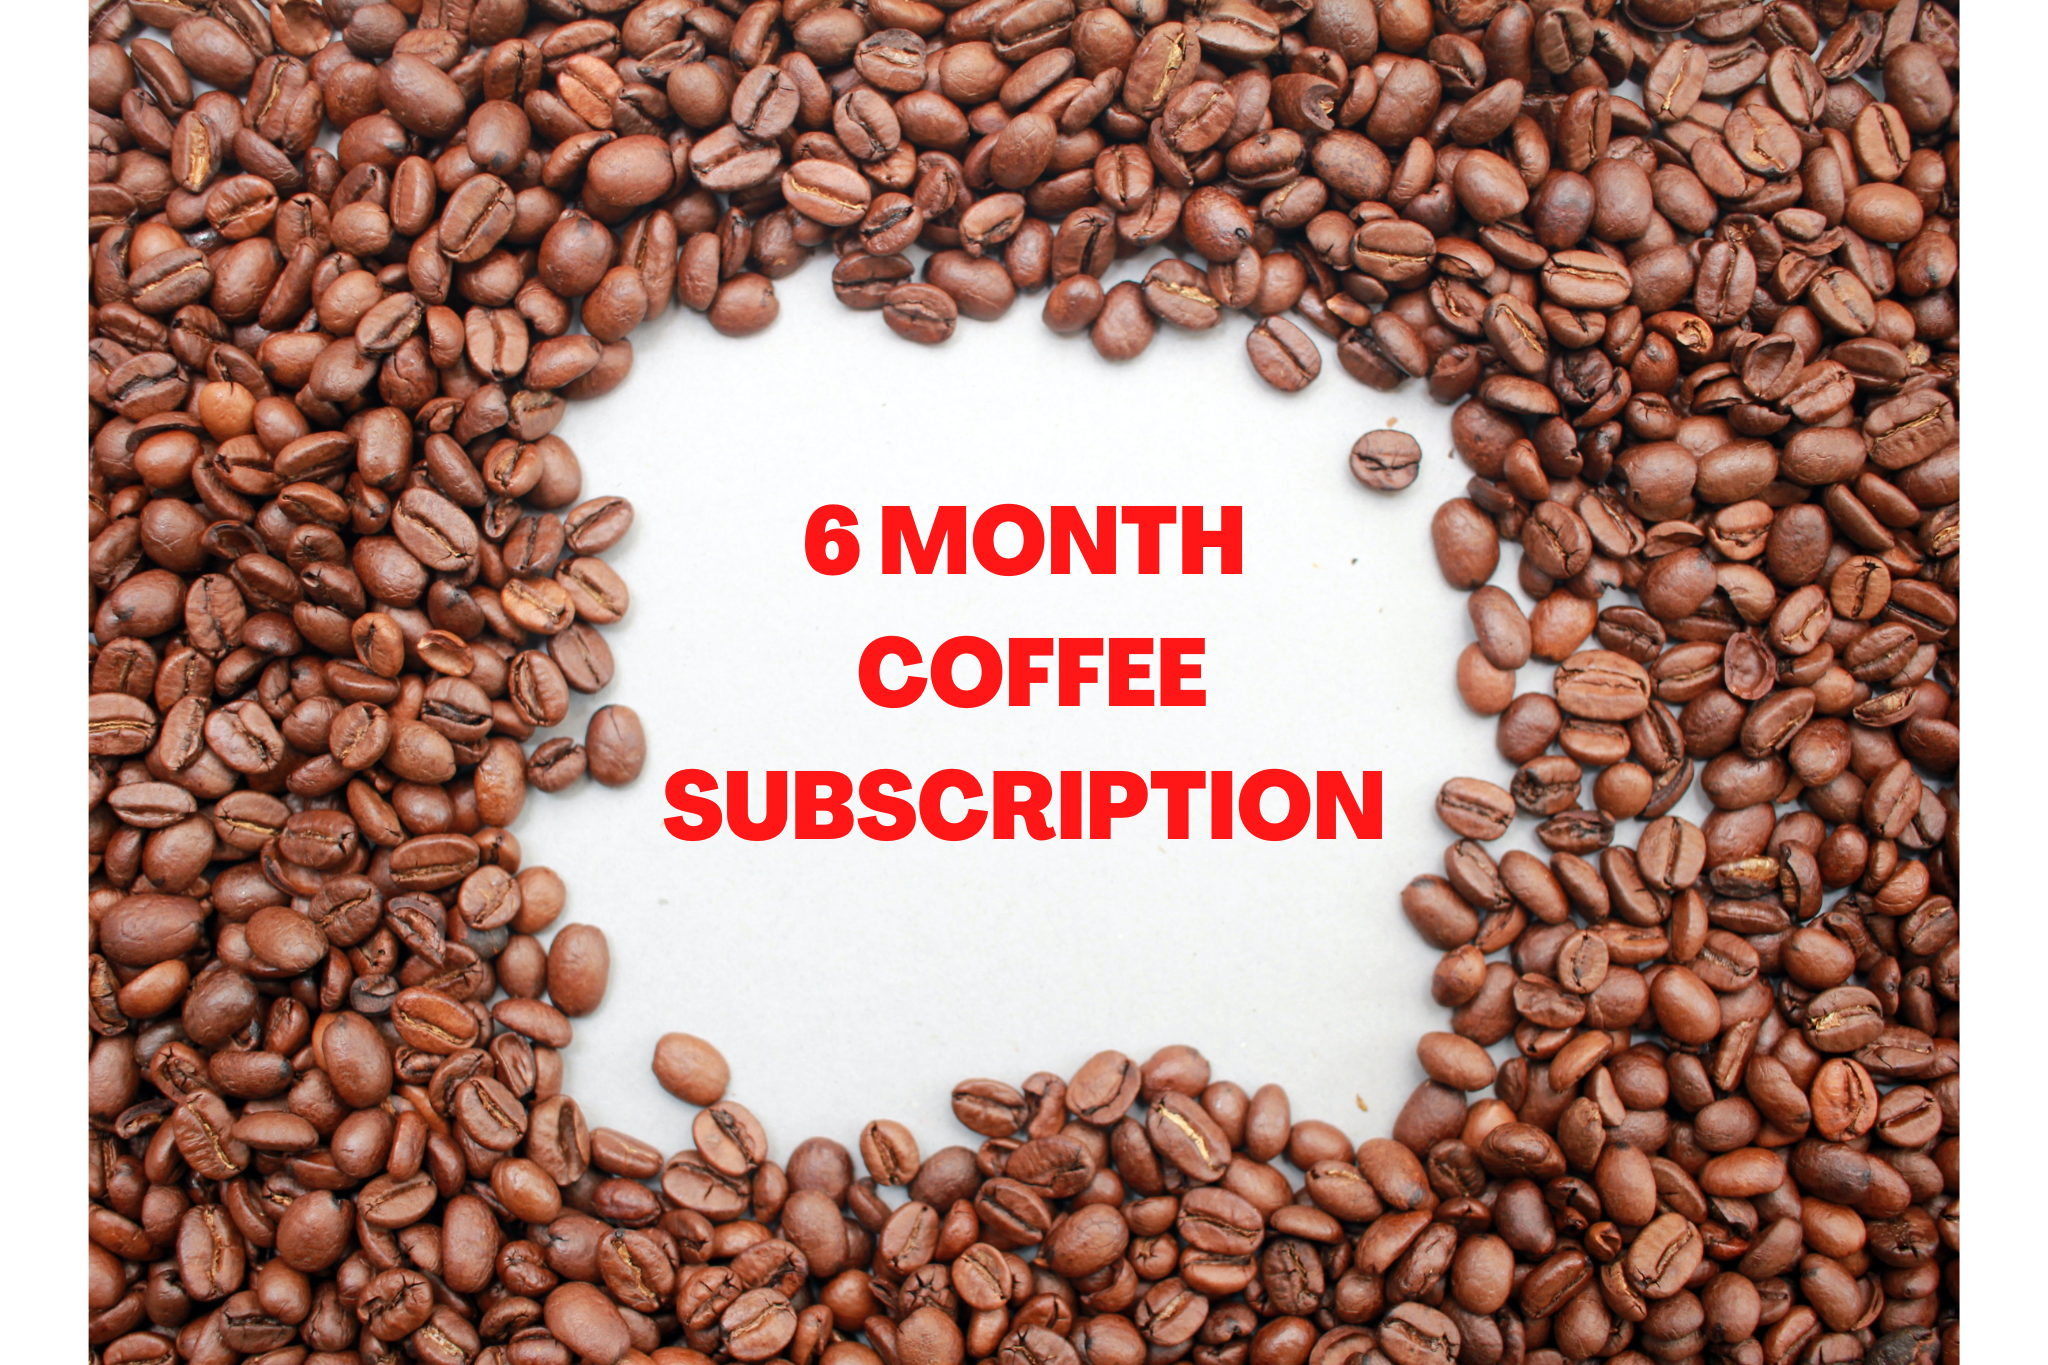 6 MONTH 12x COFFEE TASTING SUBSCRIPTION